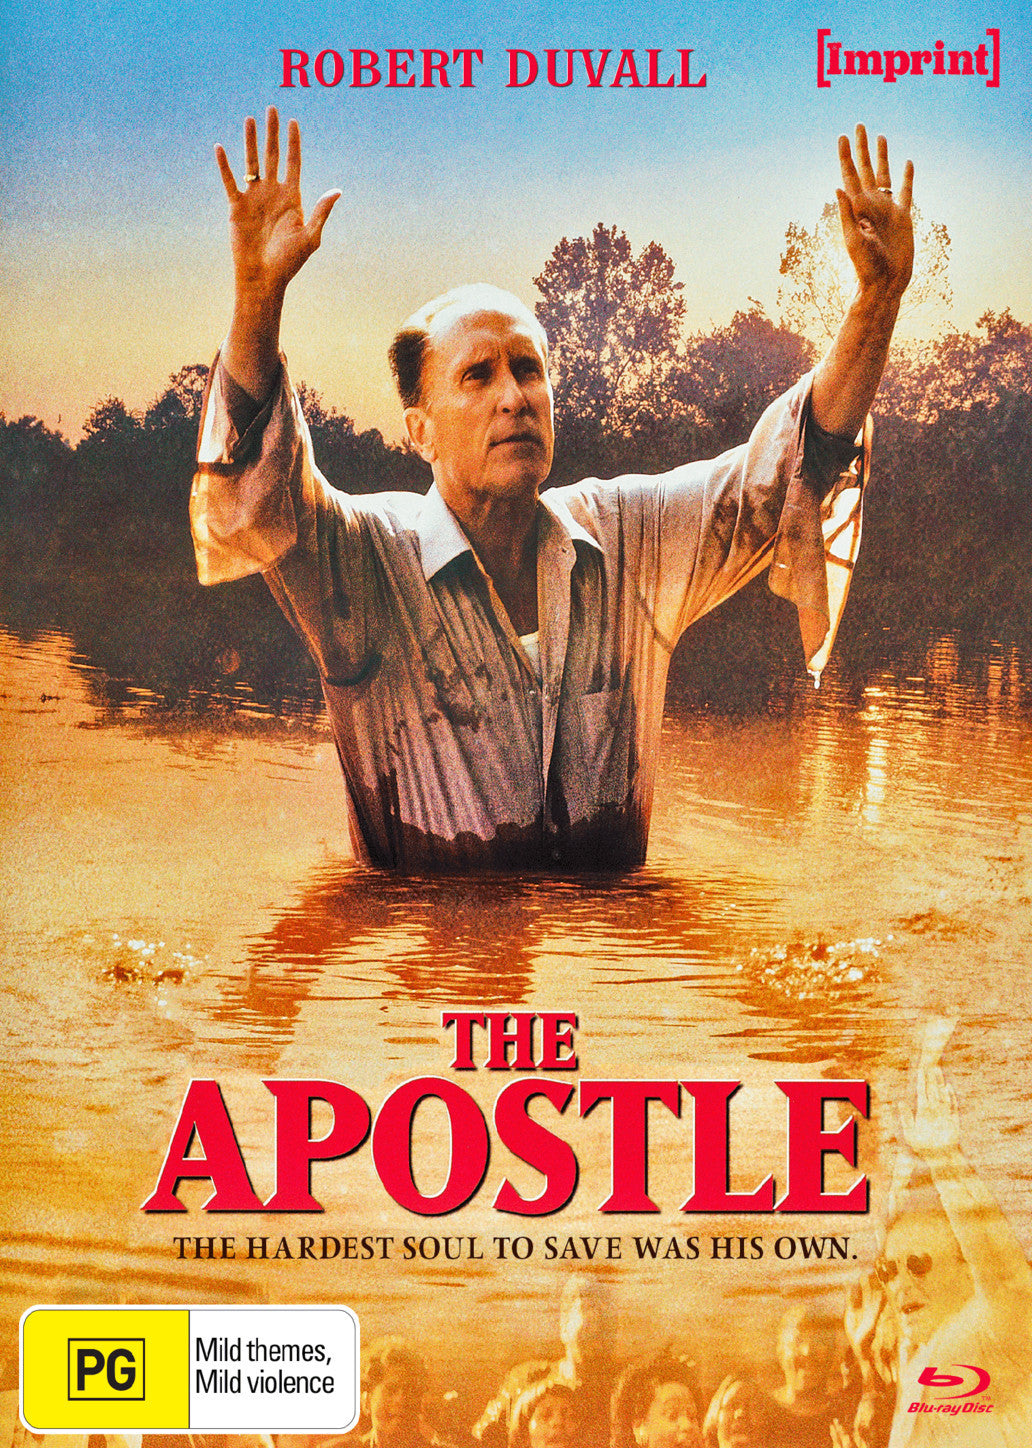 THE APOSTLE (REGION FREE IMPORT - LIMITED EDITION) BLU-RAY